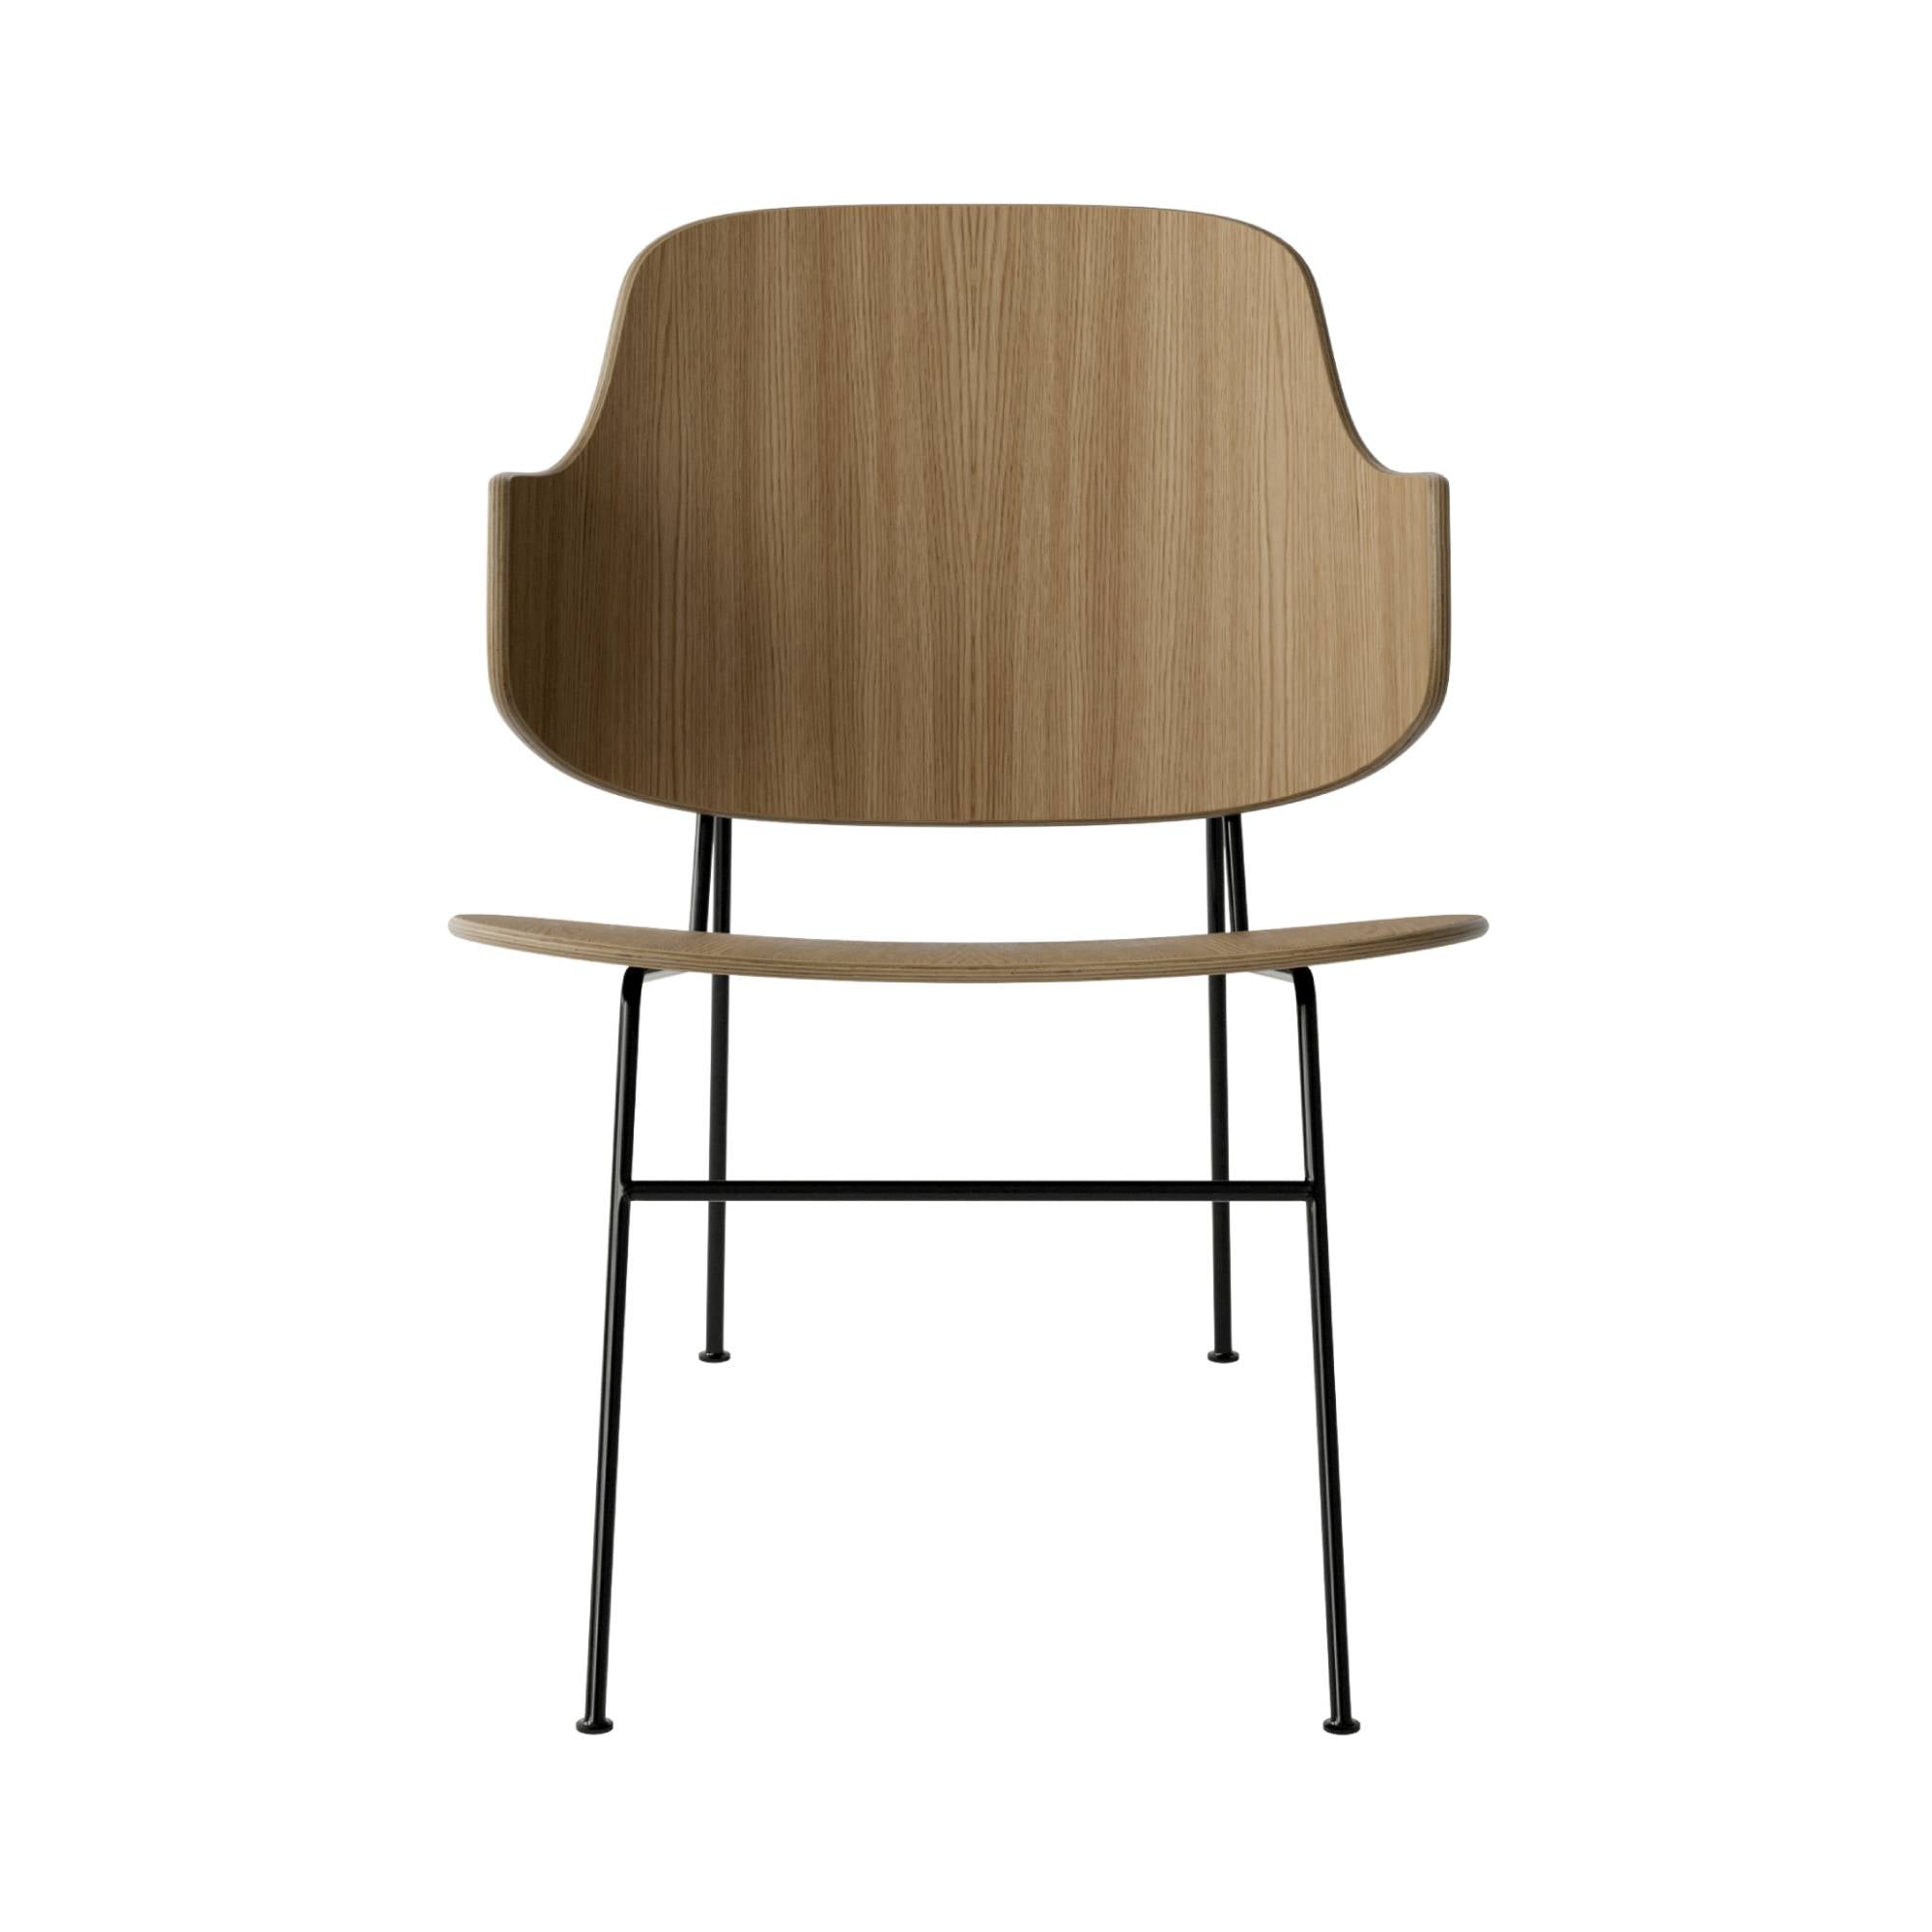 The Penguin Lounge Chair: Natural Oak